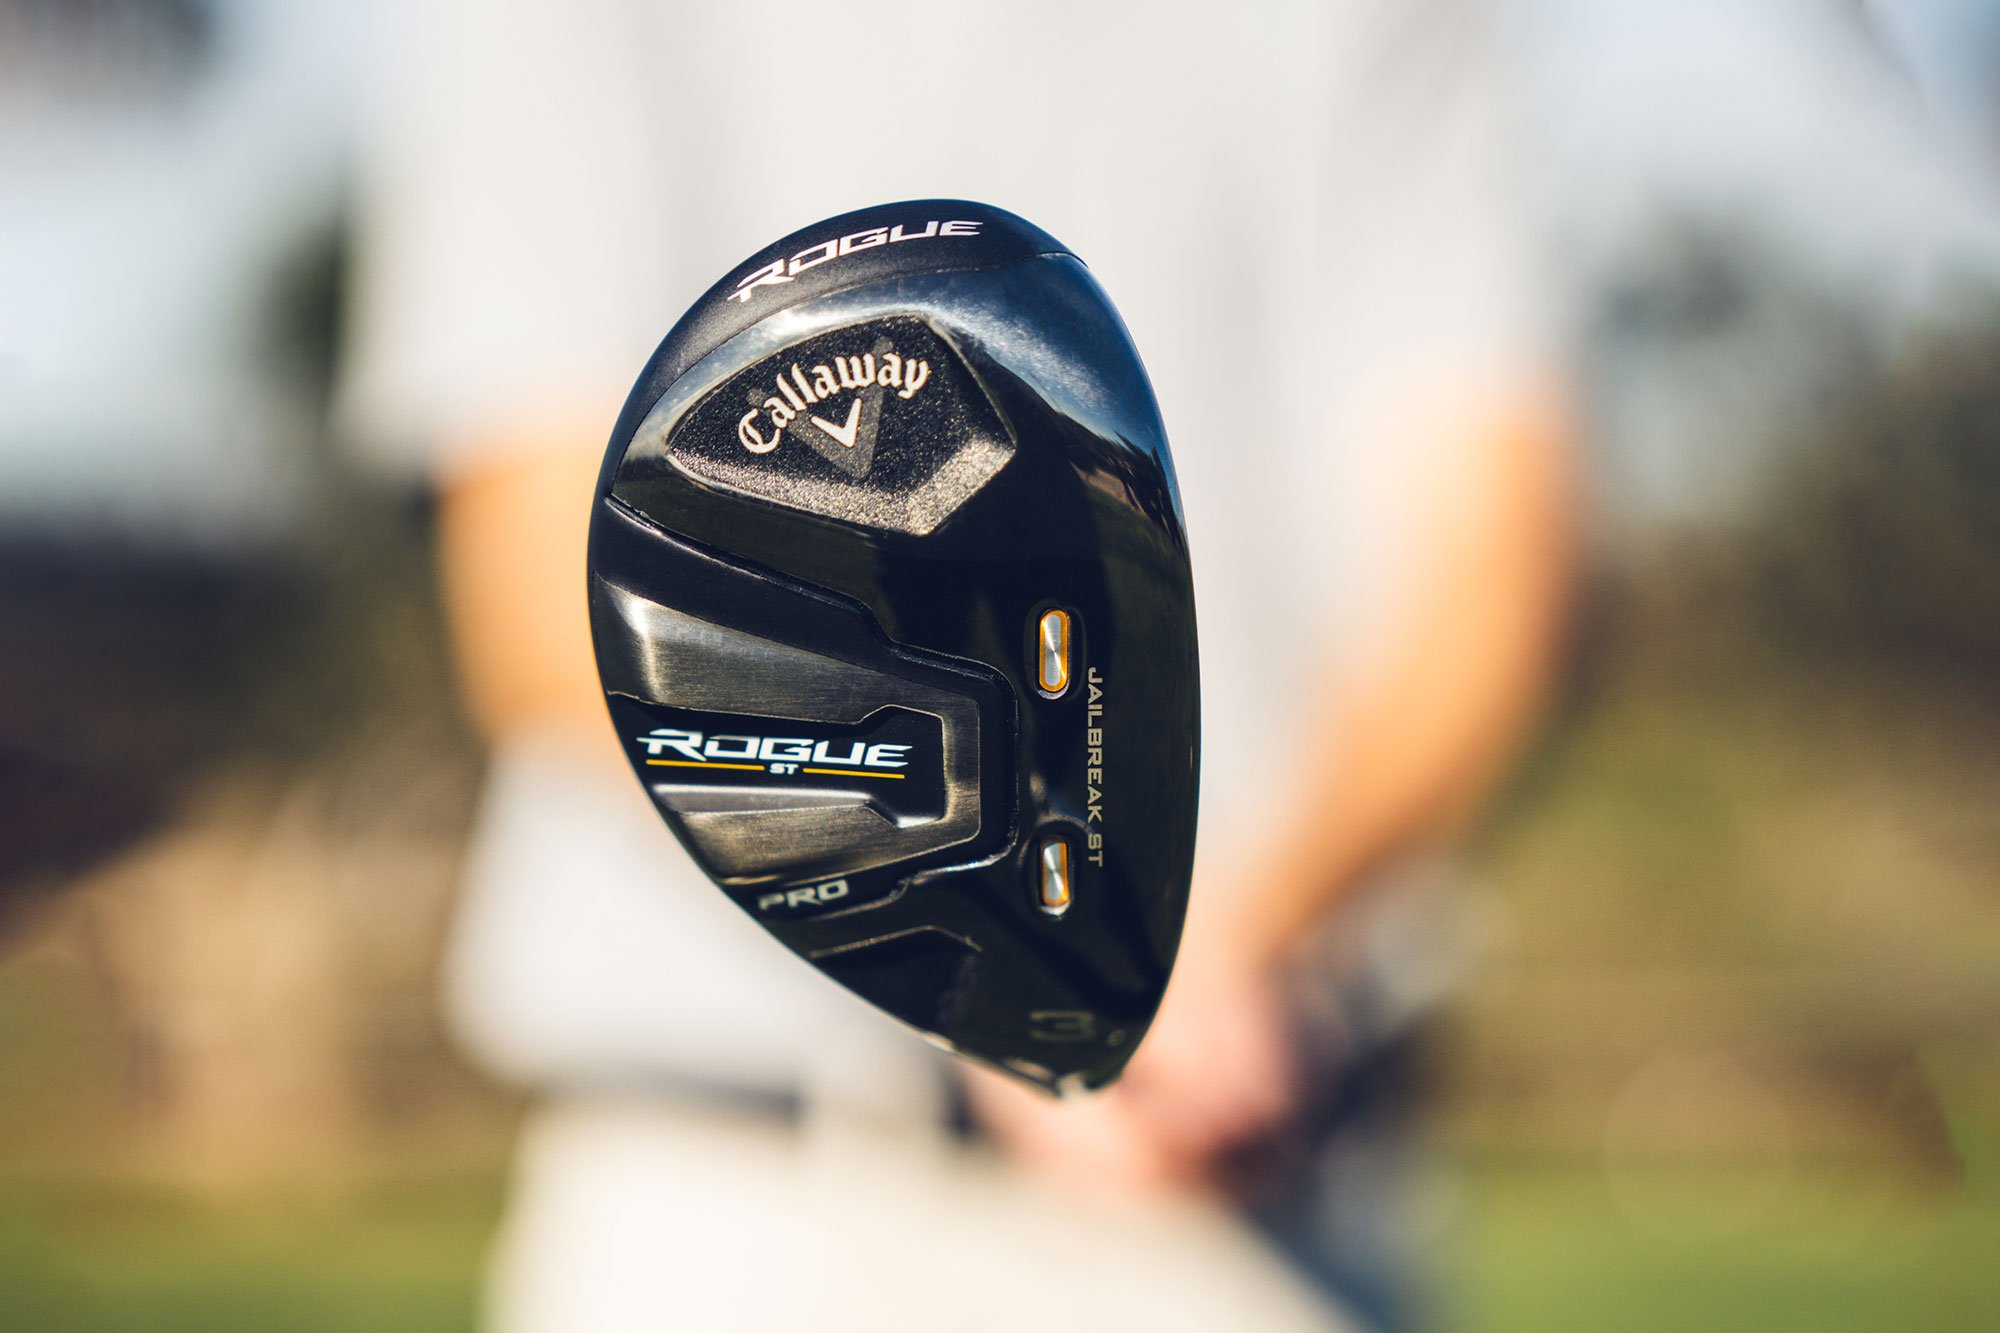 Callaway Rogue ST Pro hybrid review: Here's everything you need know!